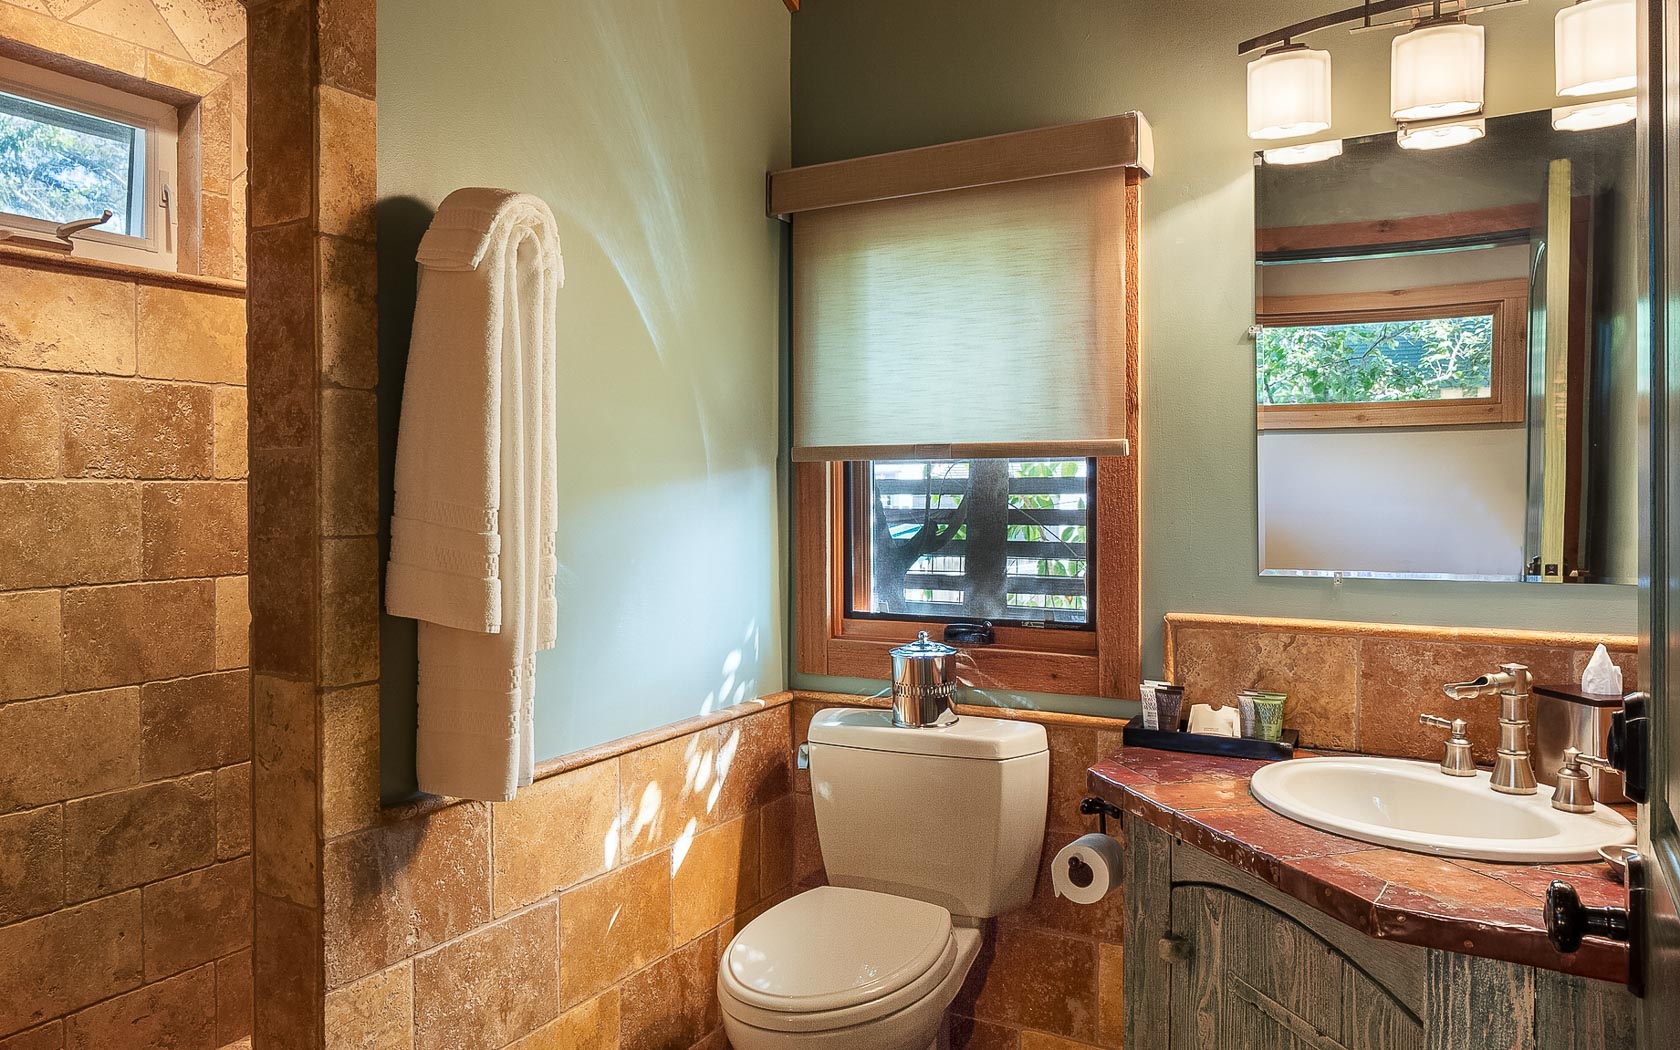 a view of the interior of the cabin bathrooms at fessparker